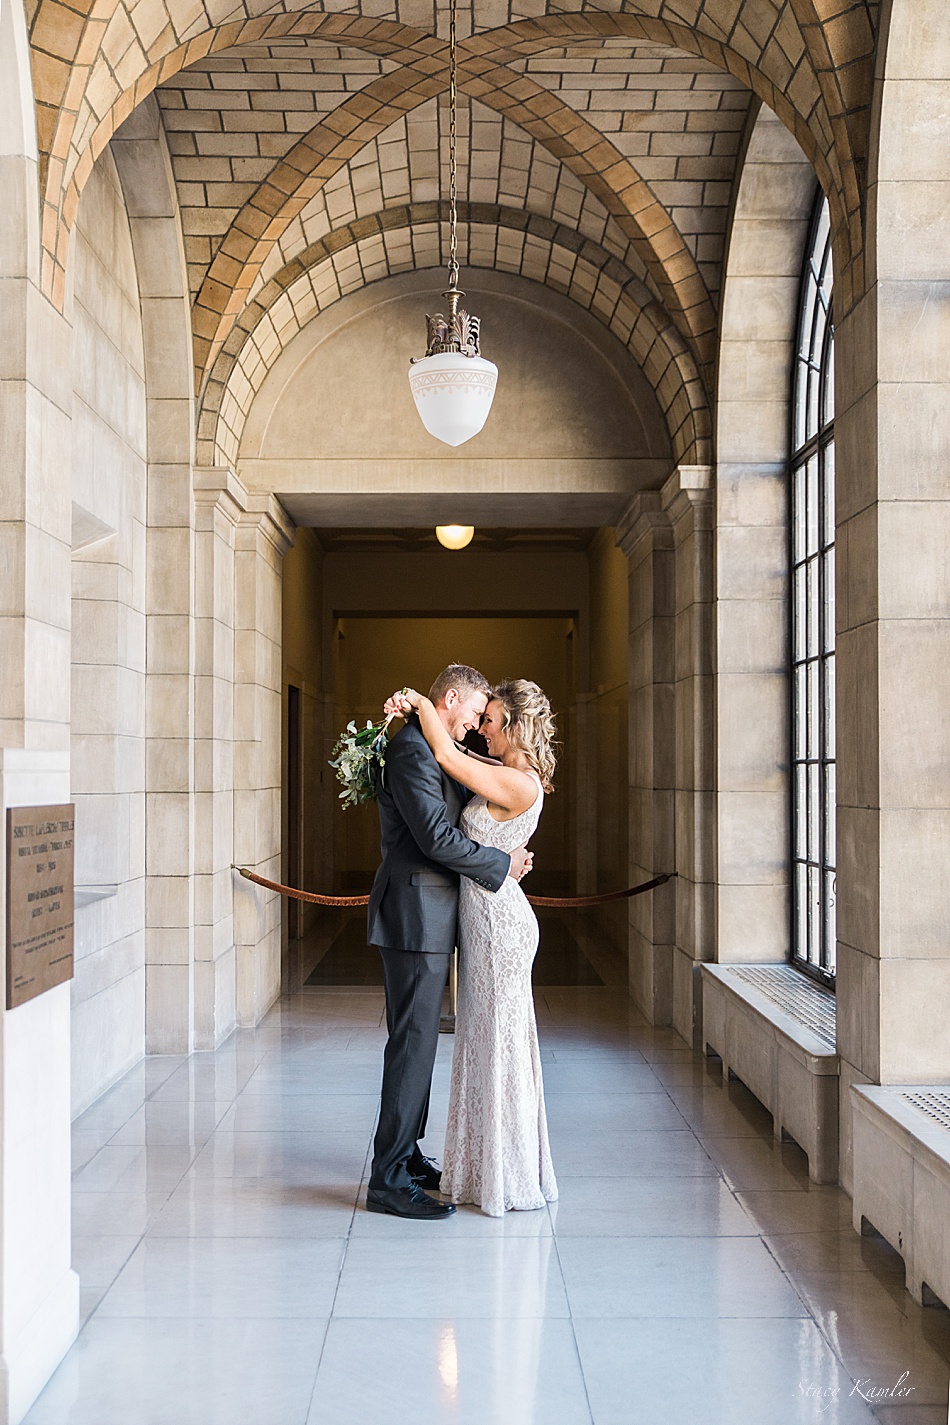 Bride and Groom photos after an intimate winter wedding at the state capitol